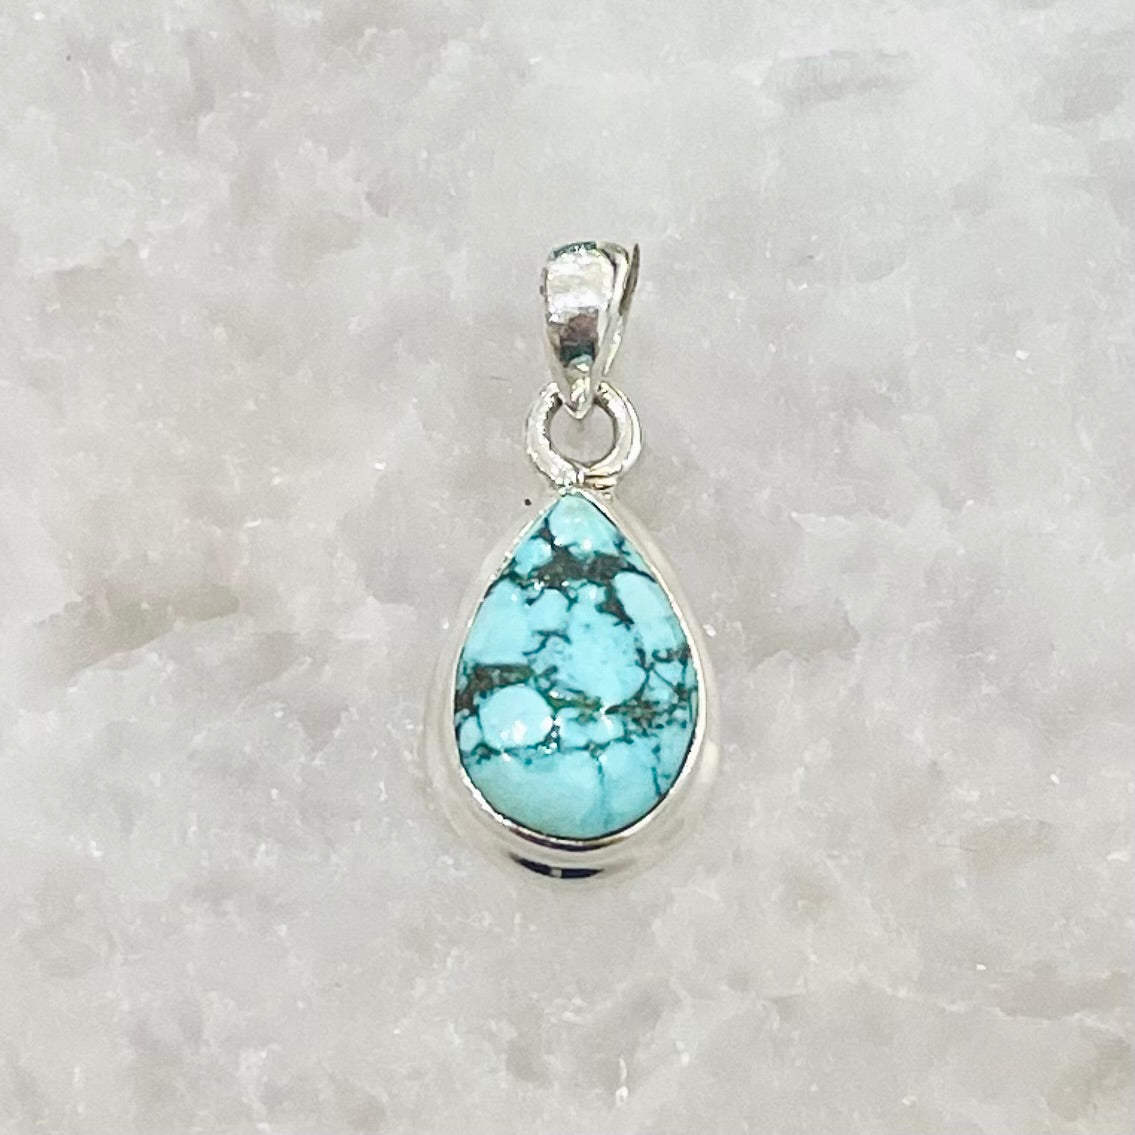 Turquoise tear drop pendant in sterling silver